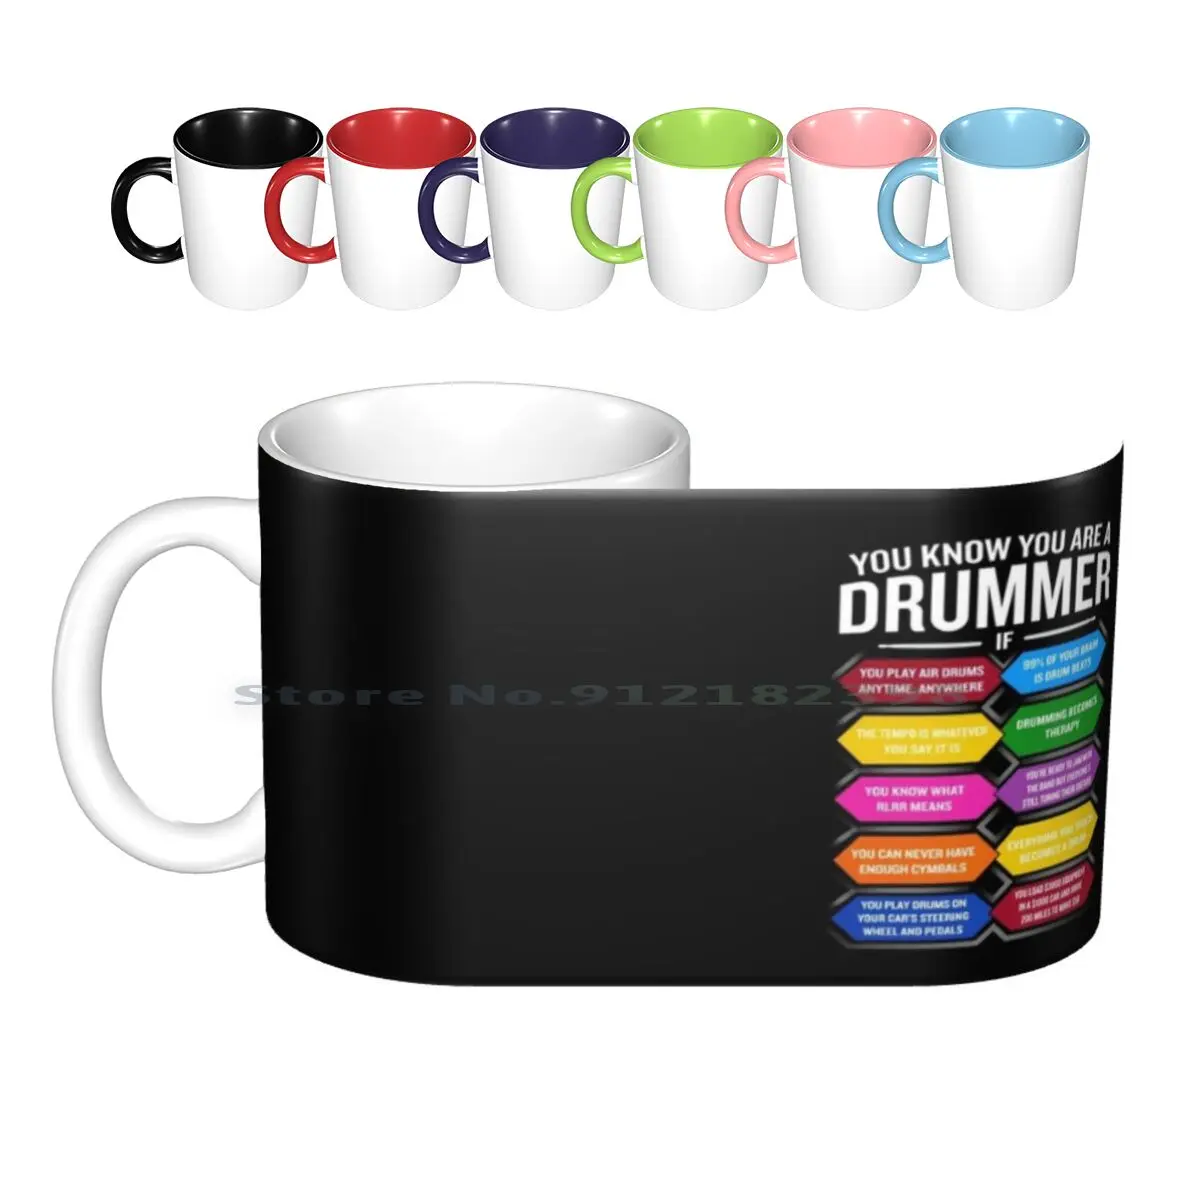 

You're A Drummer If Funny Drum Quote Top 10 Signs Ceramic Mugs Coffee Cups Milk Tea Mug Drummer Youre A Drummer Drumming Drums